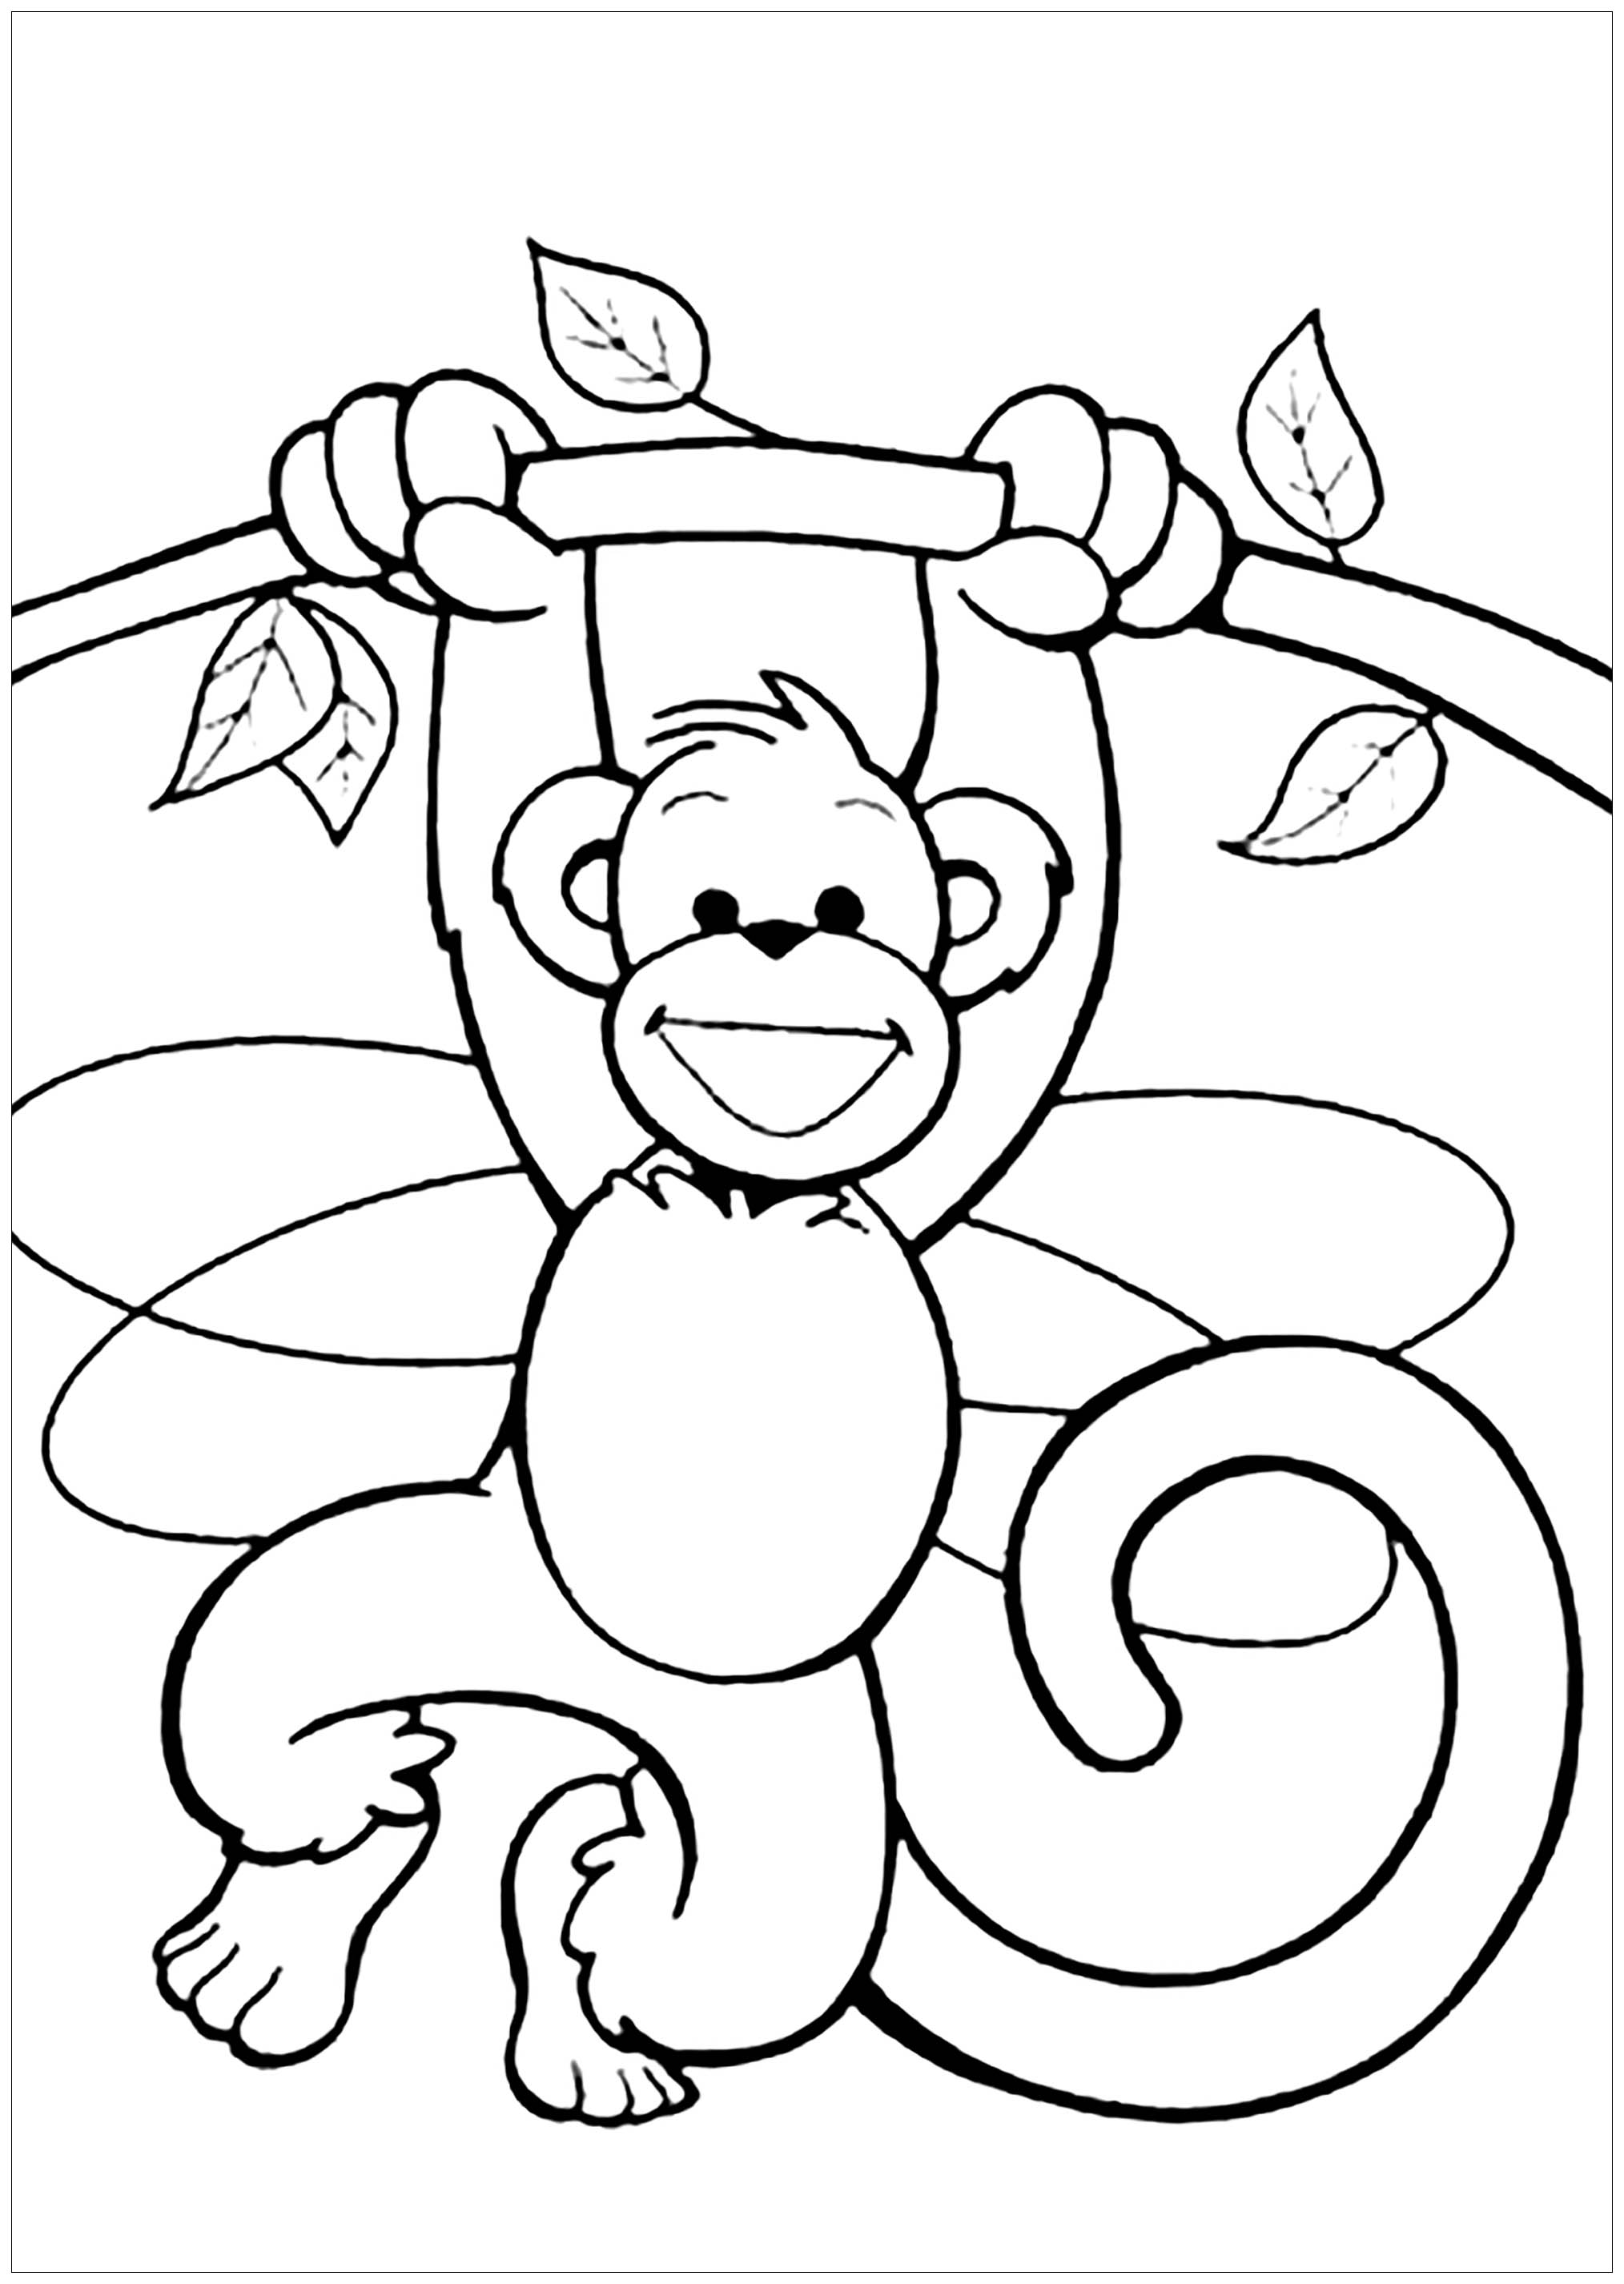 printable-monkey-pictures-printable-word-searches